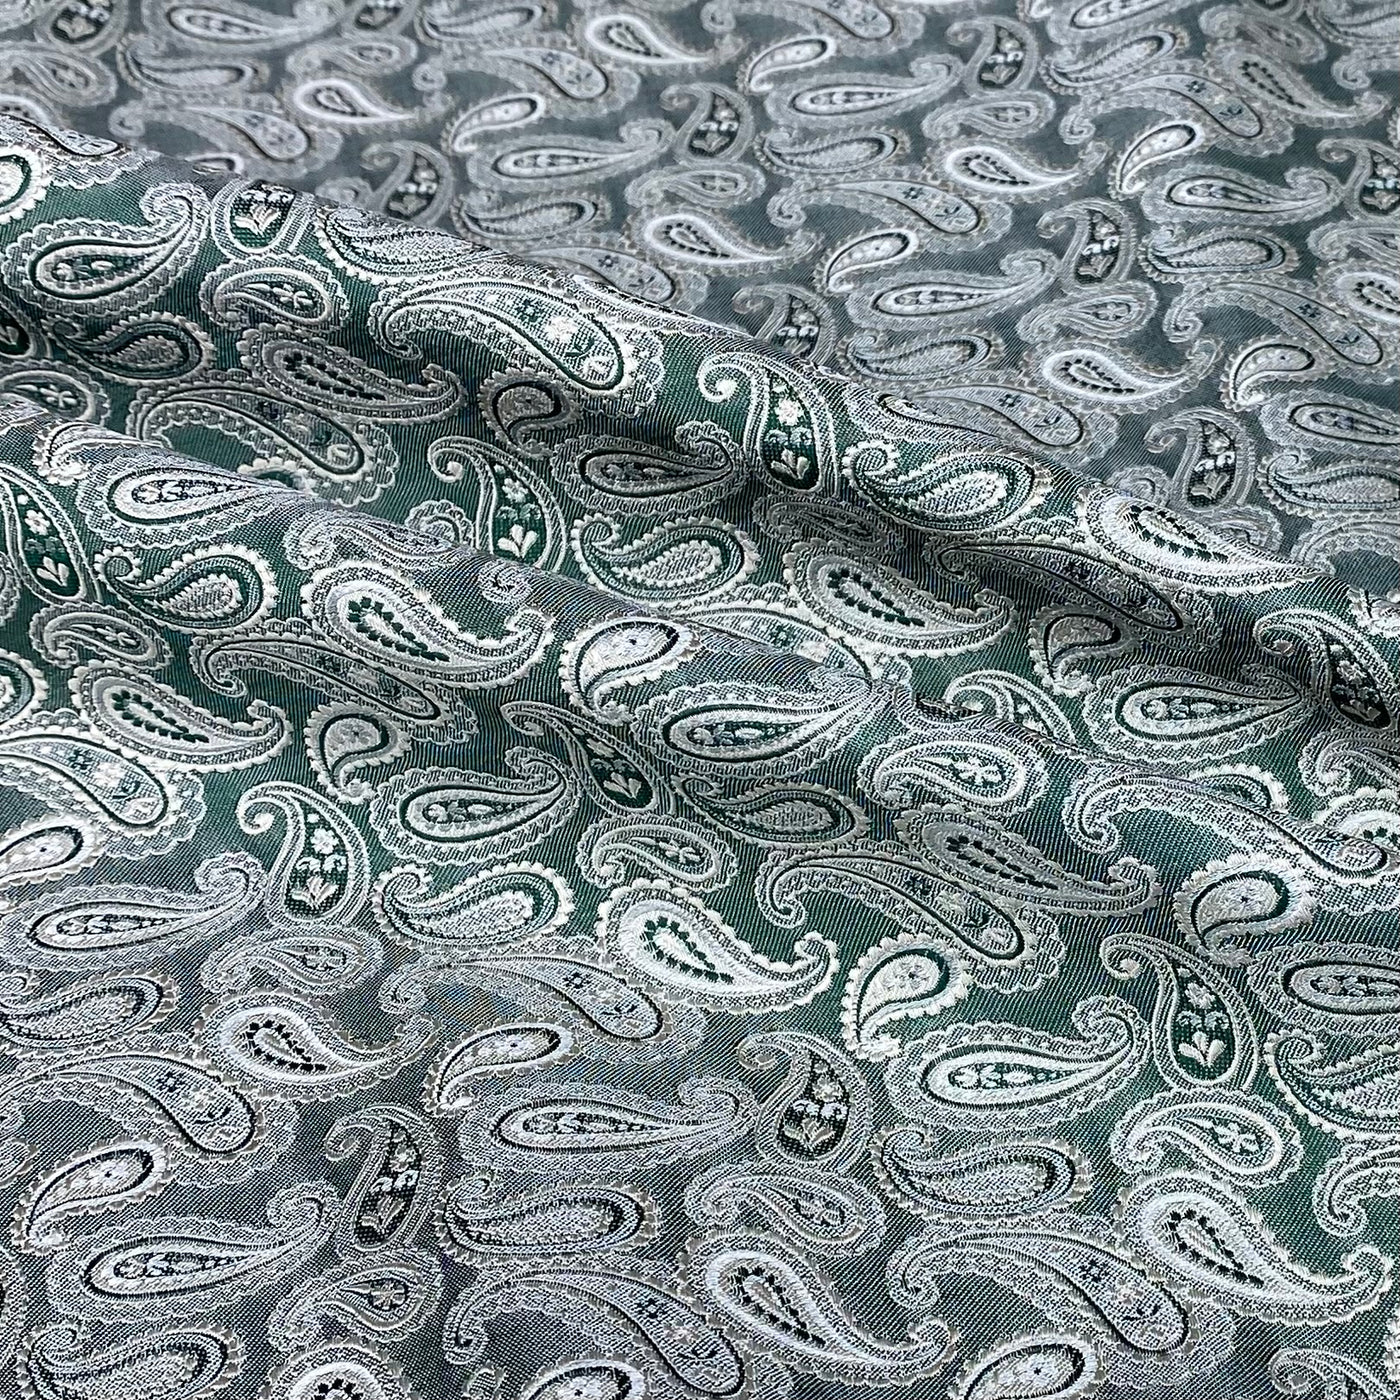 Paisley Silk/Polyester Jacquard - Green / Beige / White  - Remnant